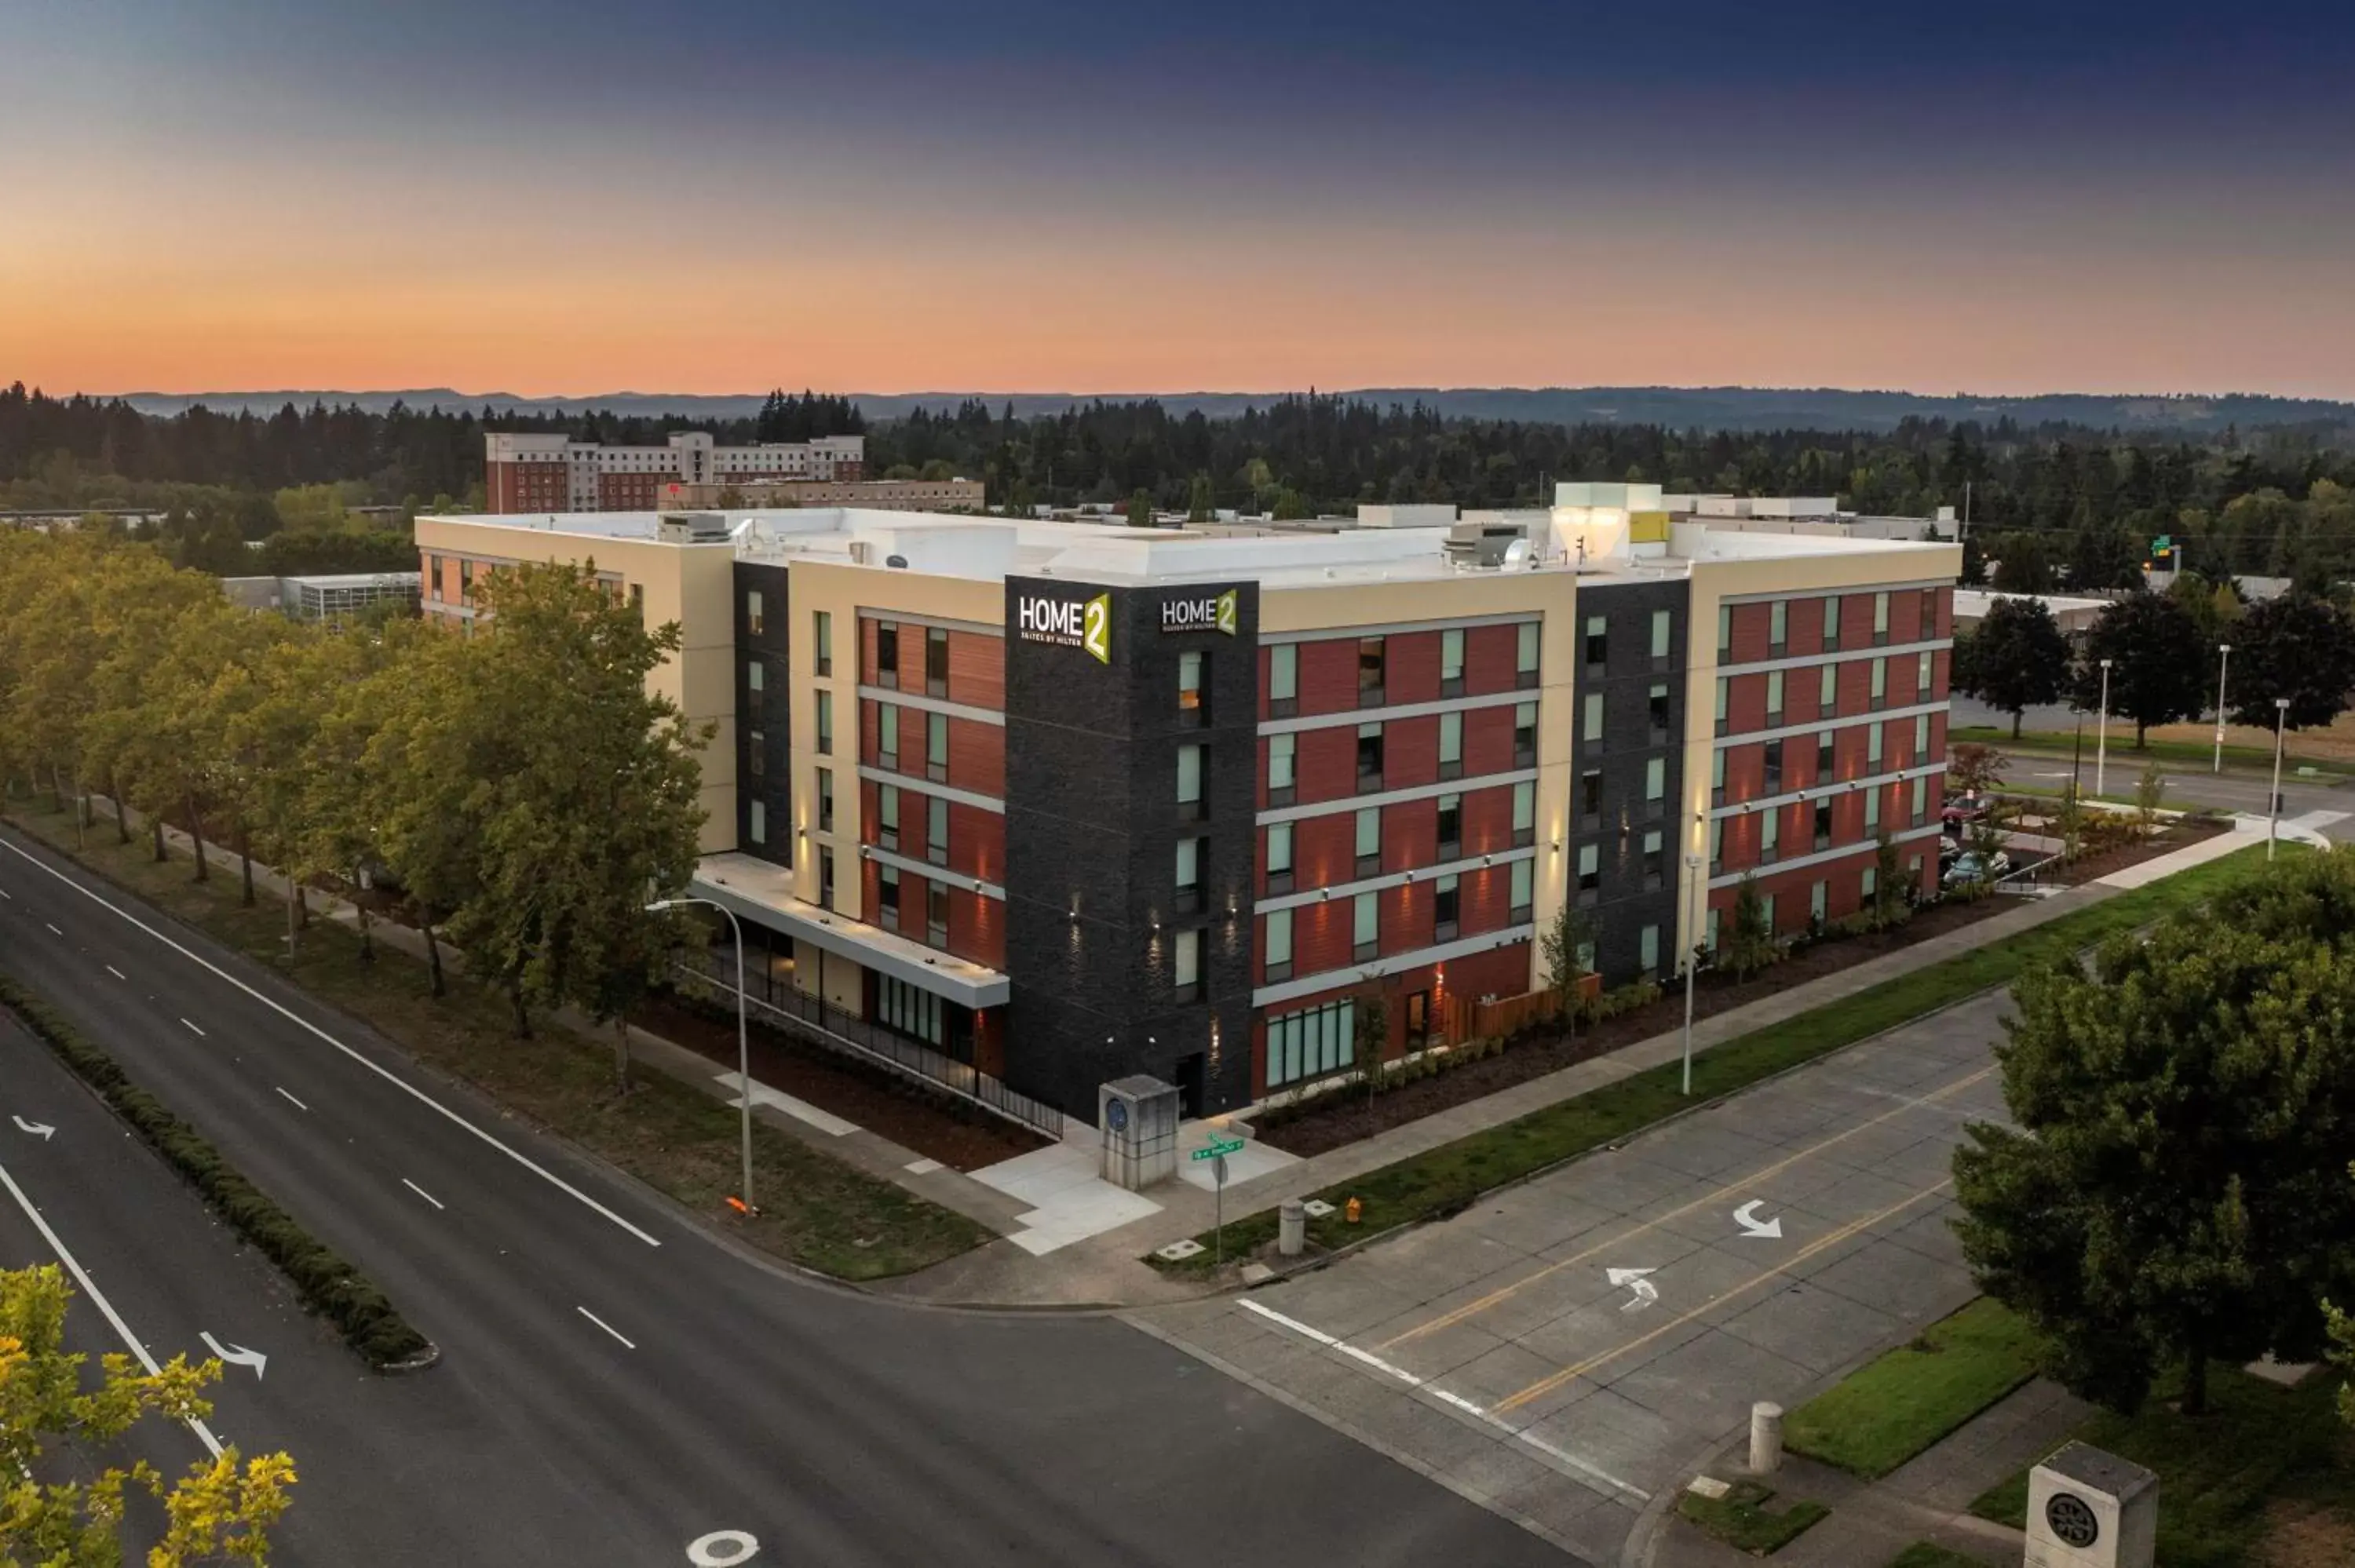 Property building, Bird's-eye View in Home2 Suites By Hilton Portland Hillsboro